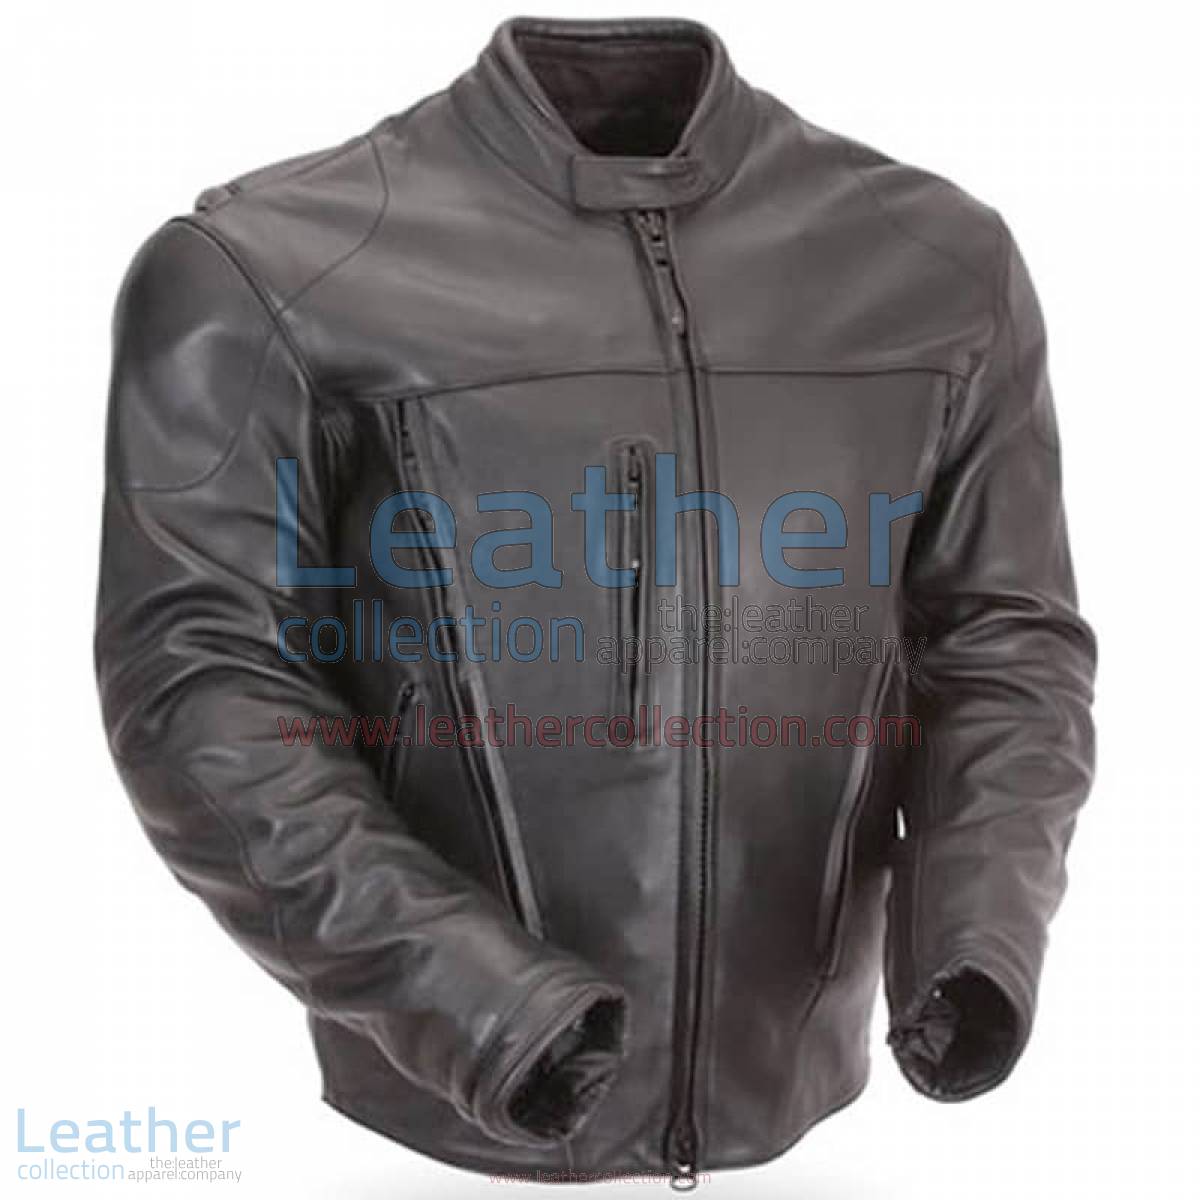 Waterproof Motorcycle Leather Jacket with CE Armor | waterproof leather jacket